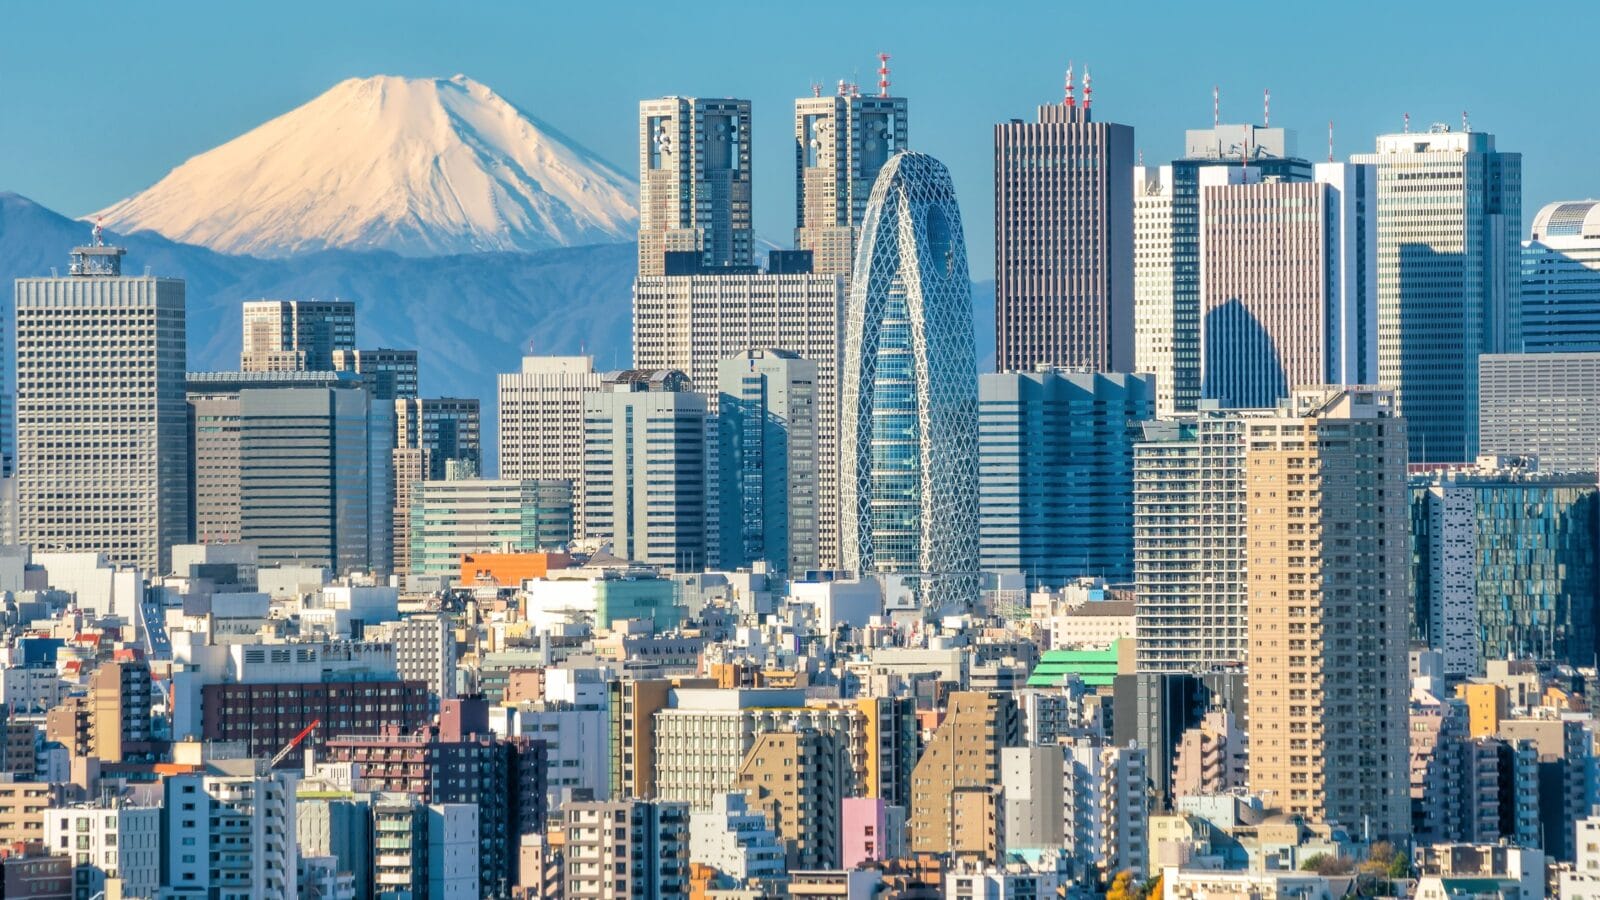 <p>Tokyo welcomes millions of tourists each year. This high-tech capital is famous for its authentic spirit and attractions such as Senso-ji Temple and the Meiji Jingu Shrine.</p><p>However, it is also home to countless off-the-beaten-path destinations like the serene Happo-en Garden off the busy streets and the entertaining Samurai Armor Photo Studio. Ever heard of maneki-neko, also known as the beckoning cat? You’ll find no shortage of these good luck charms if you visit the city’s remote Gotoku-ji Temple in the Setagaya district. After you’re done saying your prayers, you might want to enjoy the city view by ascending the Shibuya Sky Observatory for a small fee.</p>